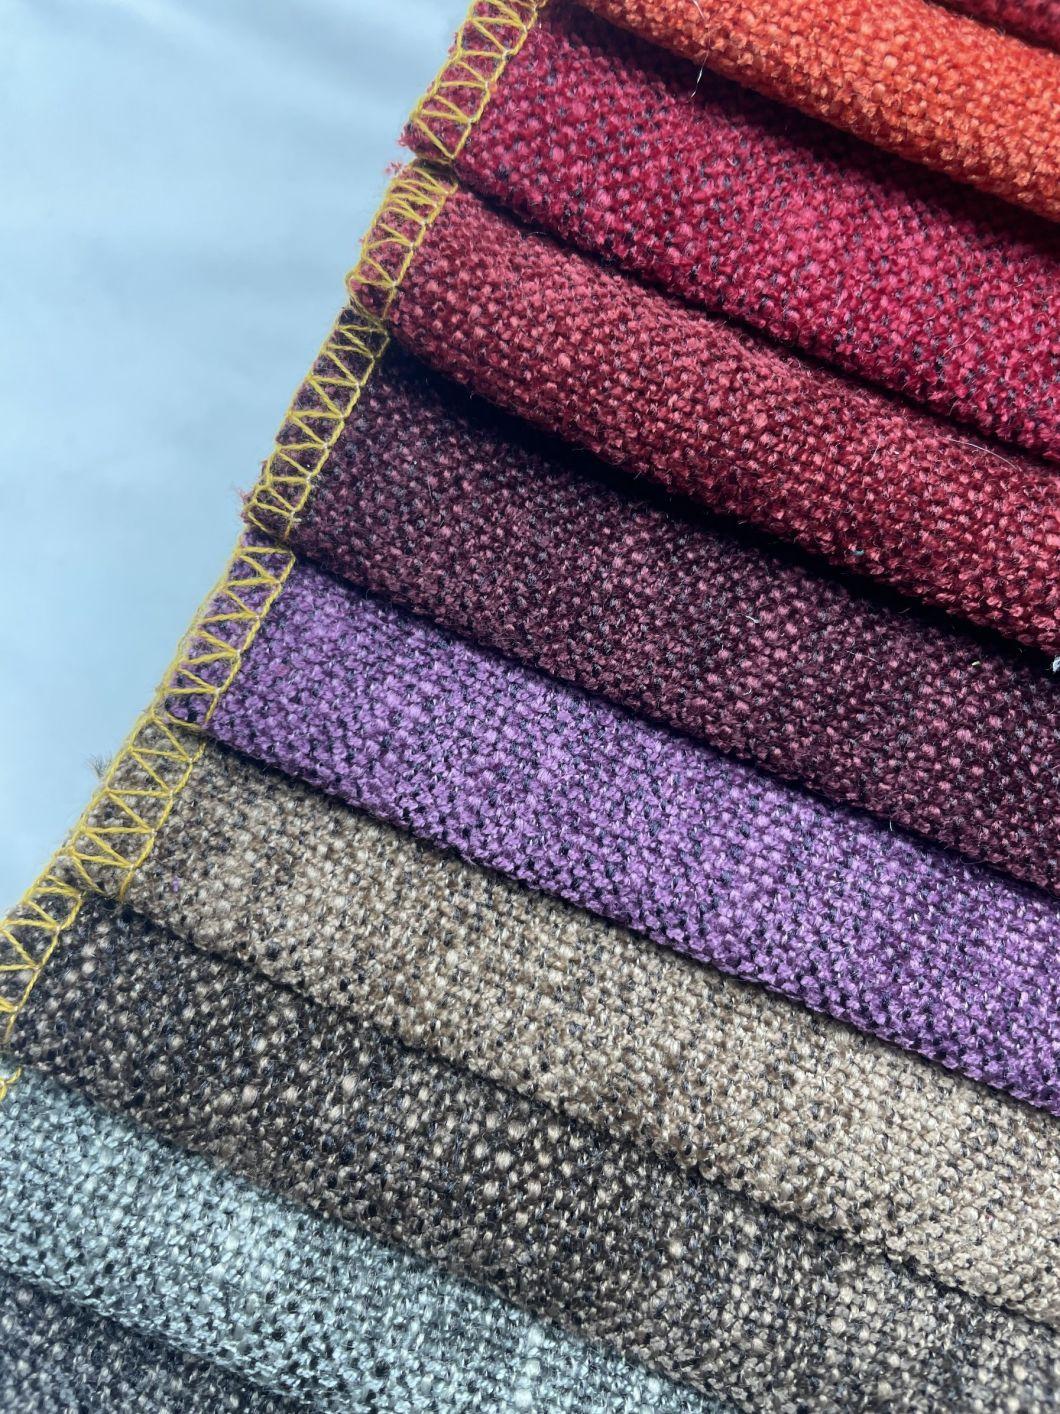 Sofa Upholstery Polyester Fabric145cm Width 100% Polyester Knitted Chenille Sofa Fabric Jacquard Sofa Upholstery Fabric for Sofa